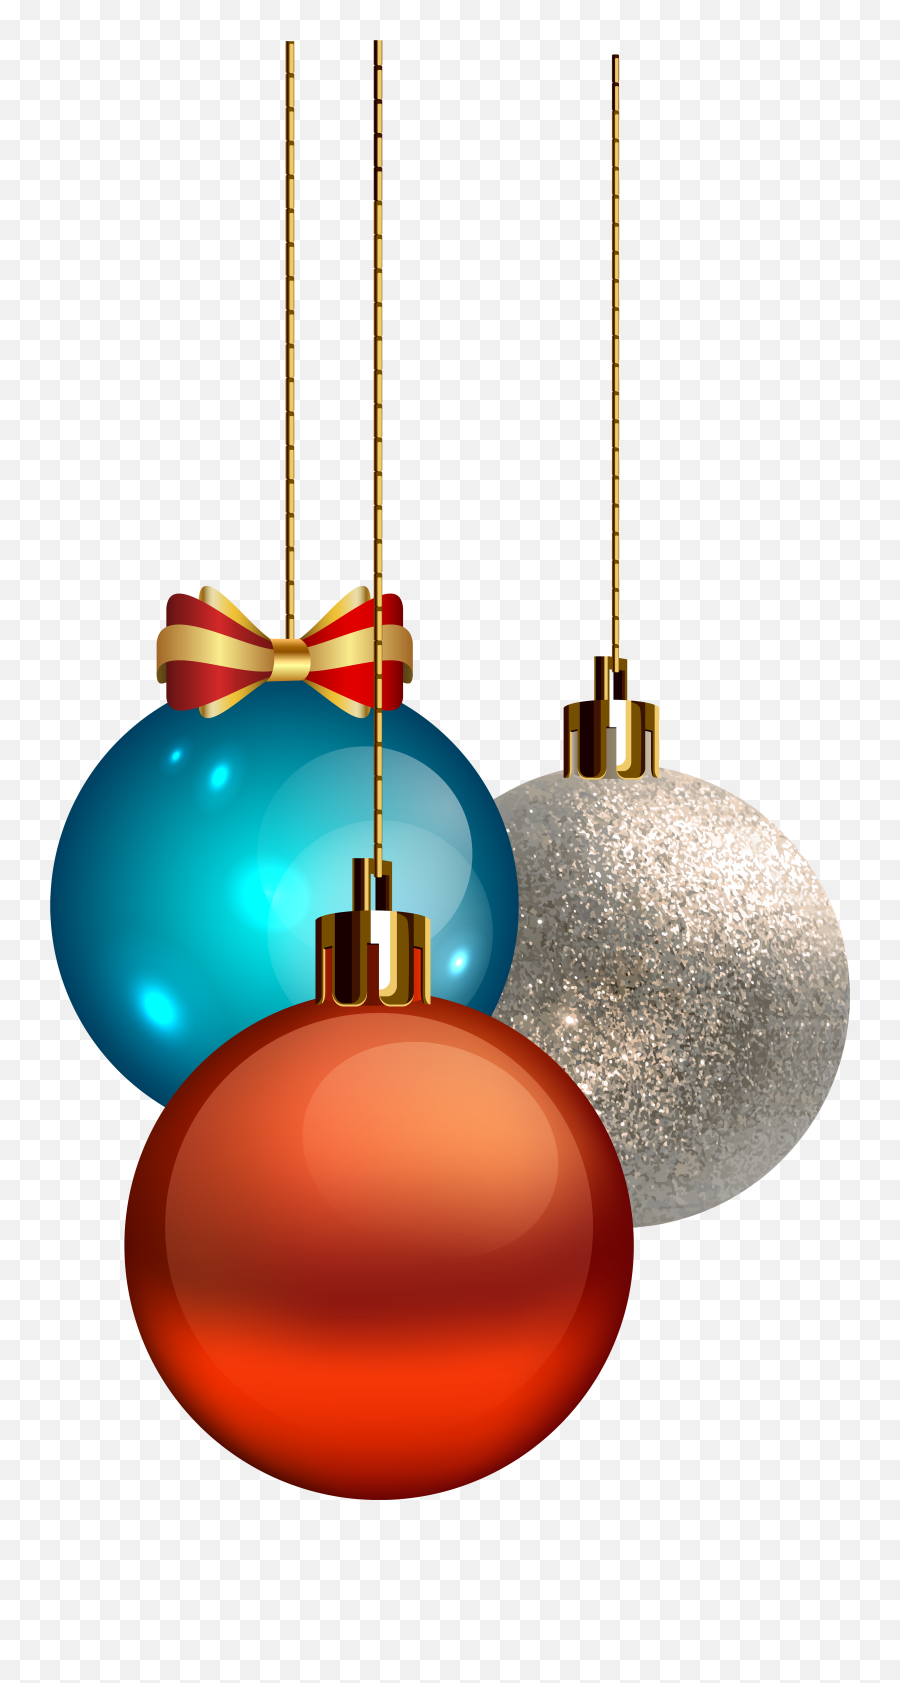 Christmas Ball Png With Transparant - Christmas Balls Transparent Background,Balls Png